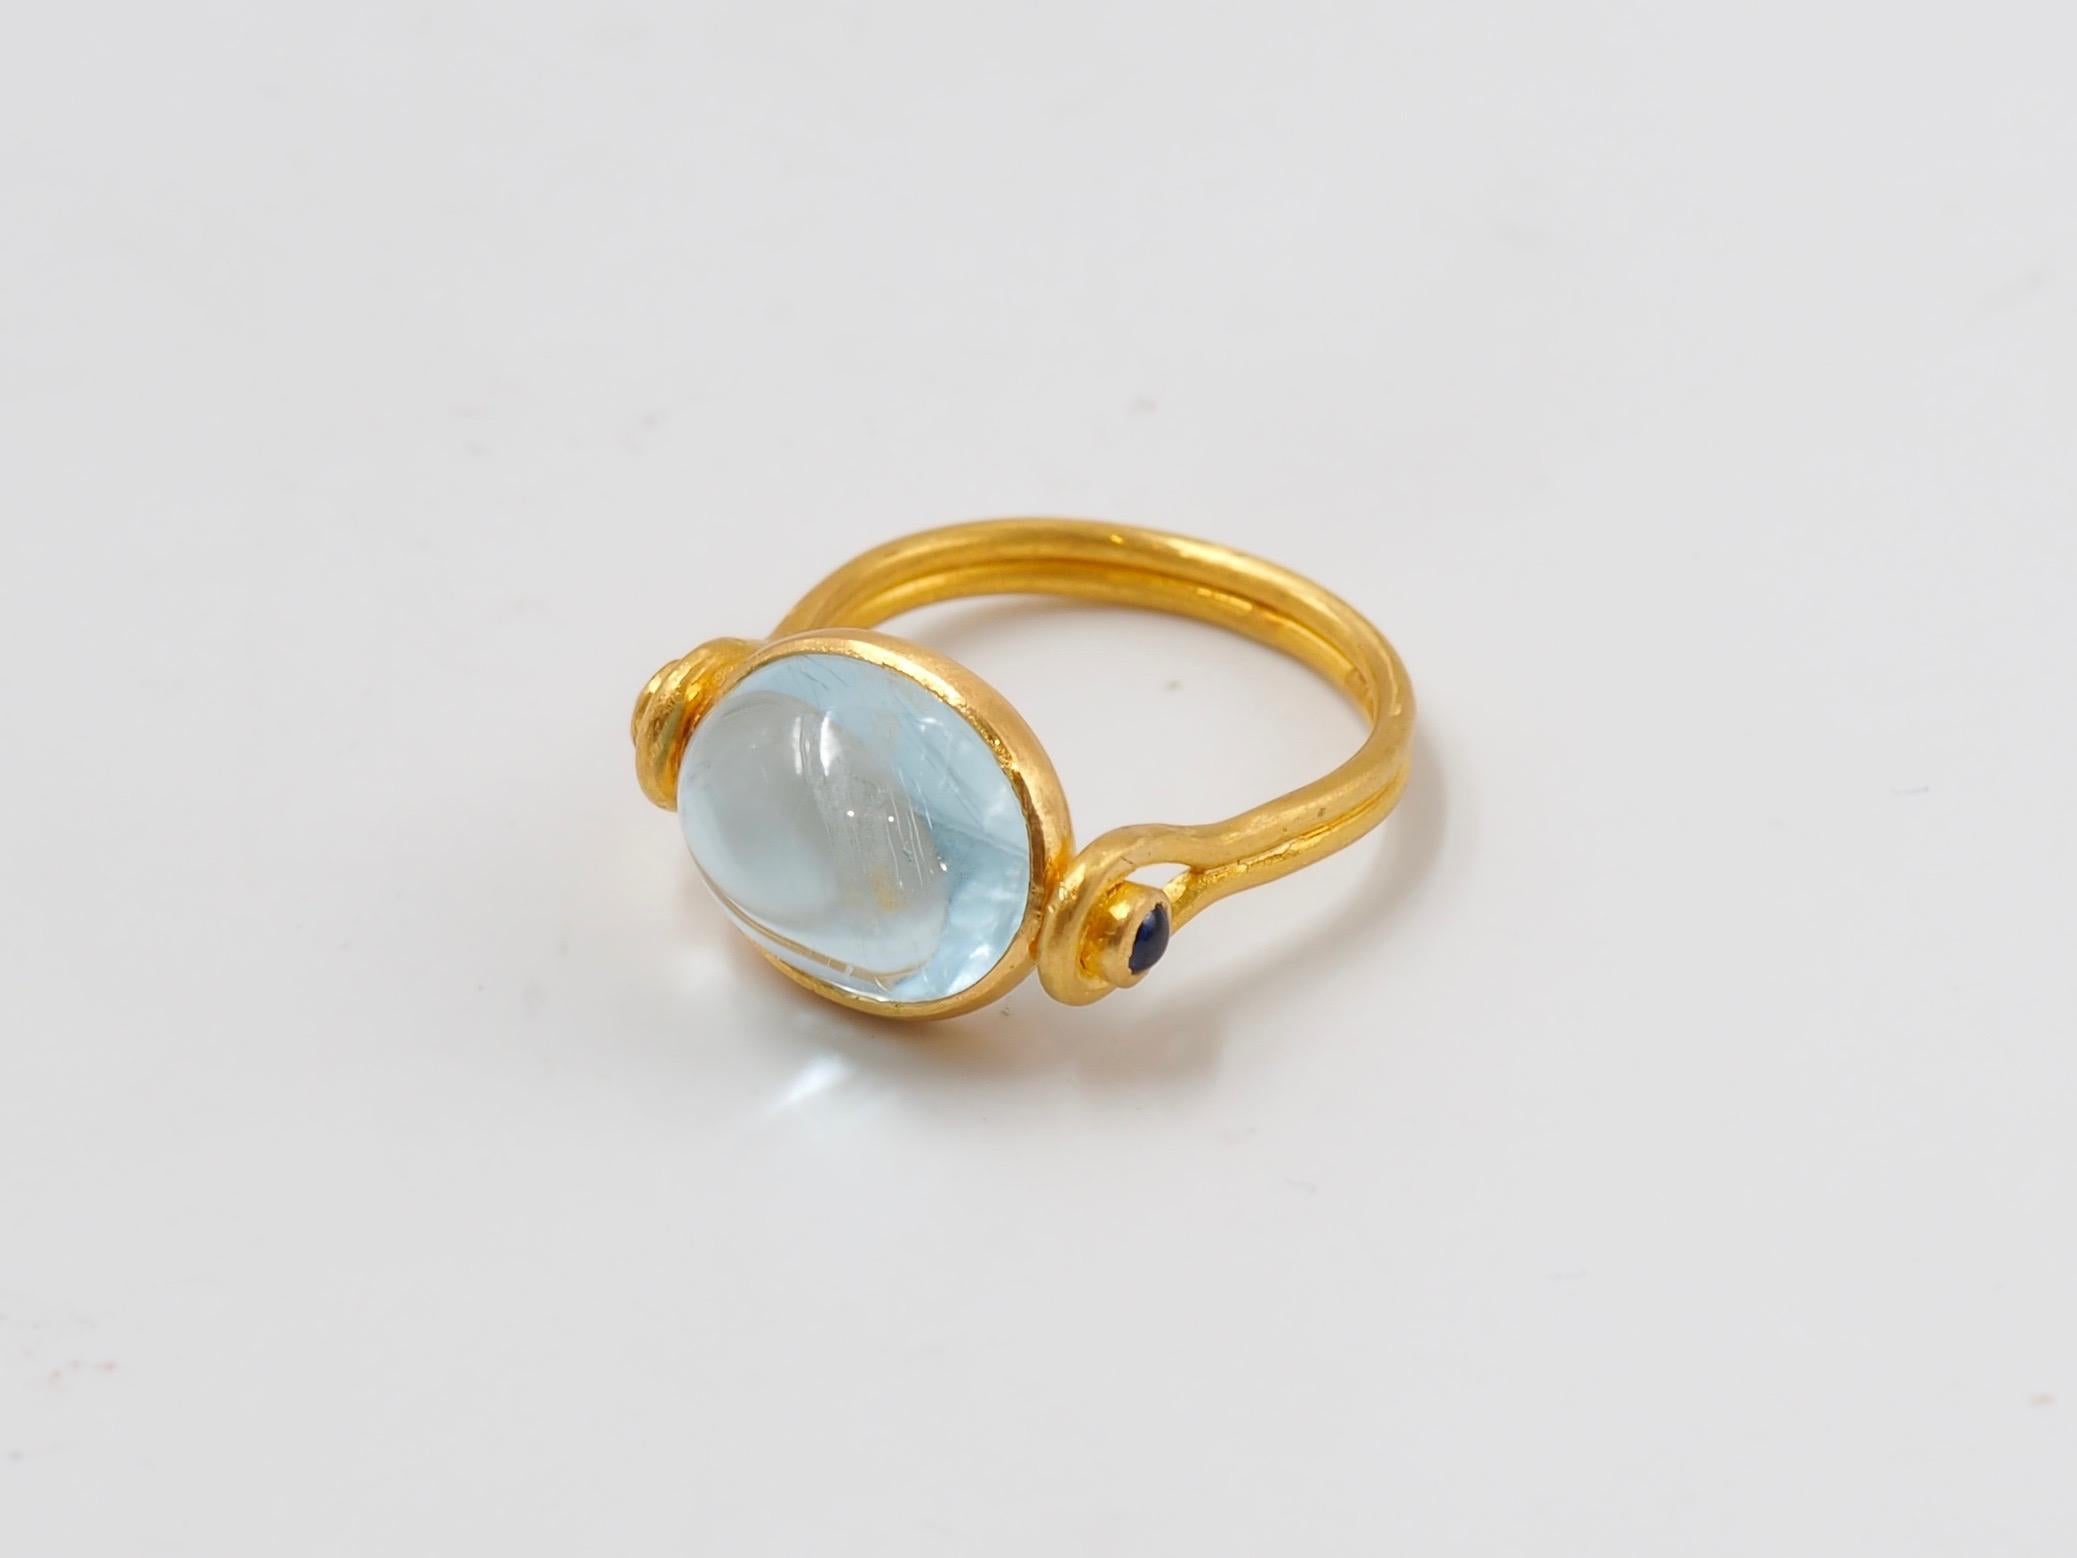 This antic style ring by Scrives is set with a large aquamarine cabochon of 5.32 cts. The light colour of the aquamarine gives a lot of light effect and brightness. The stone is natural and not treated. It shows minor visible natural inclusions. 